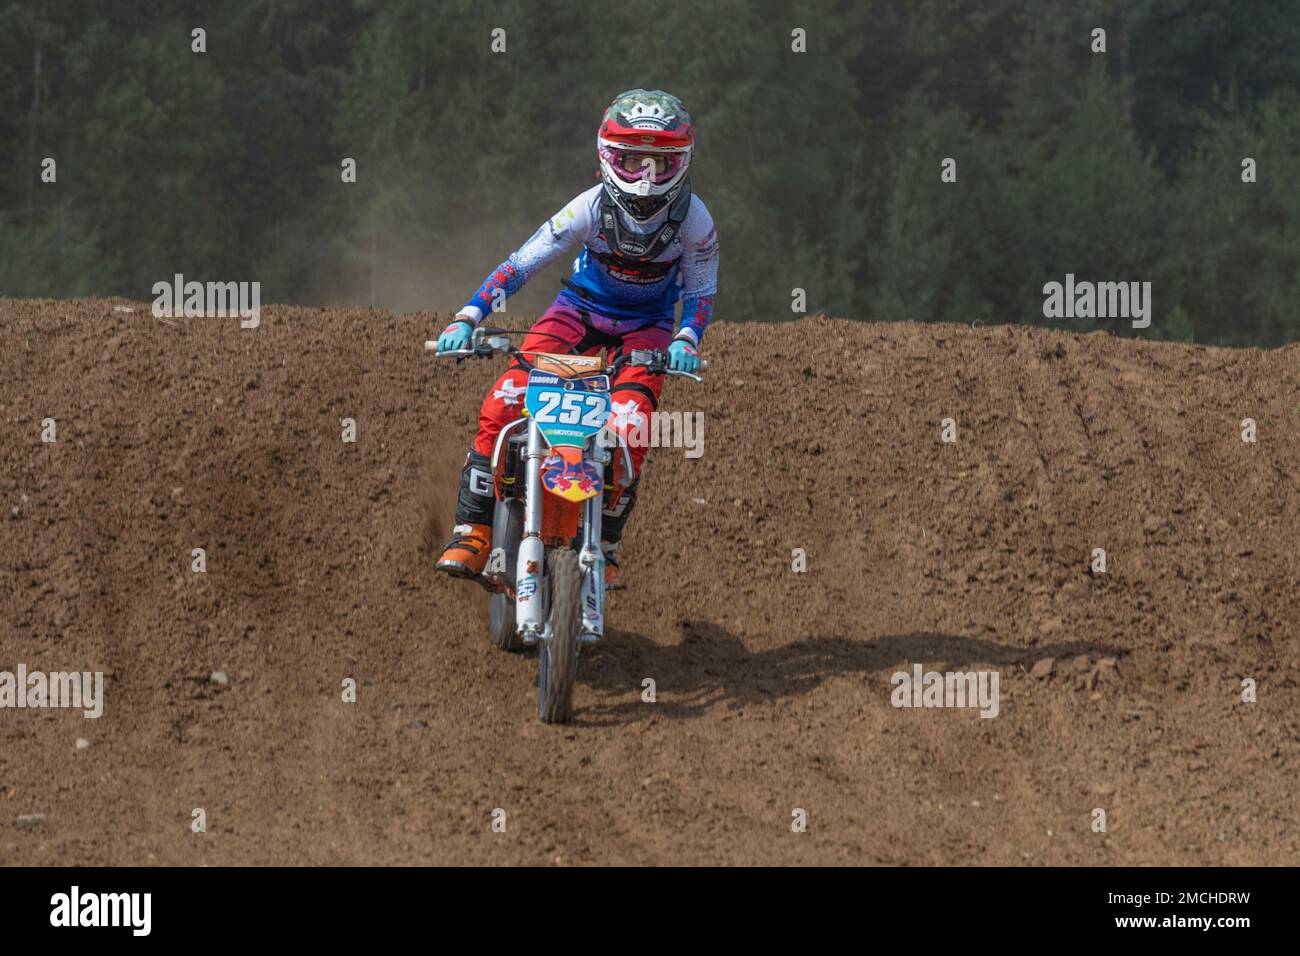 SHARYA, RUSSIA - AUGUST 06, 2022: Young rider on motocross motorcycle on motocross track. Cup dedicated to the memory of L.A. Voronin Stock Photo